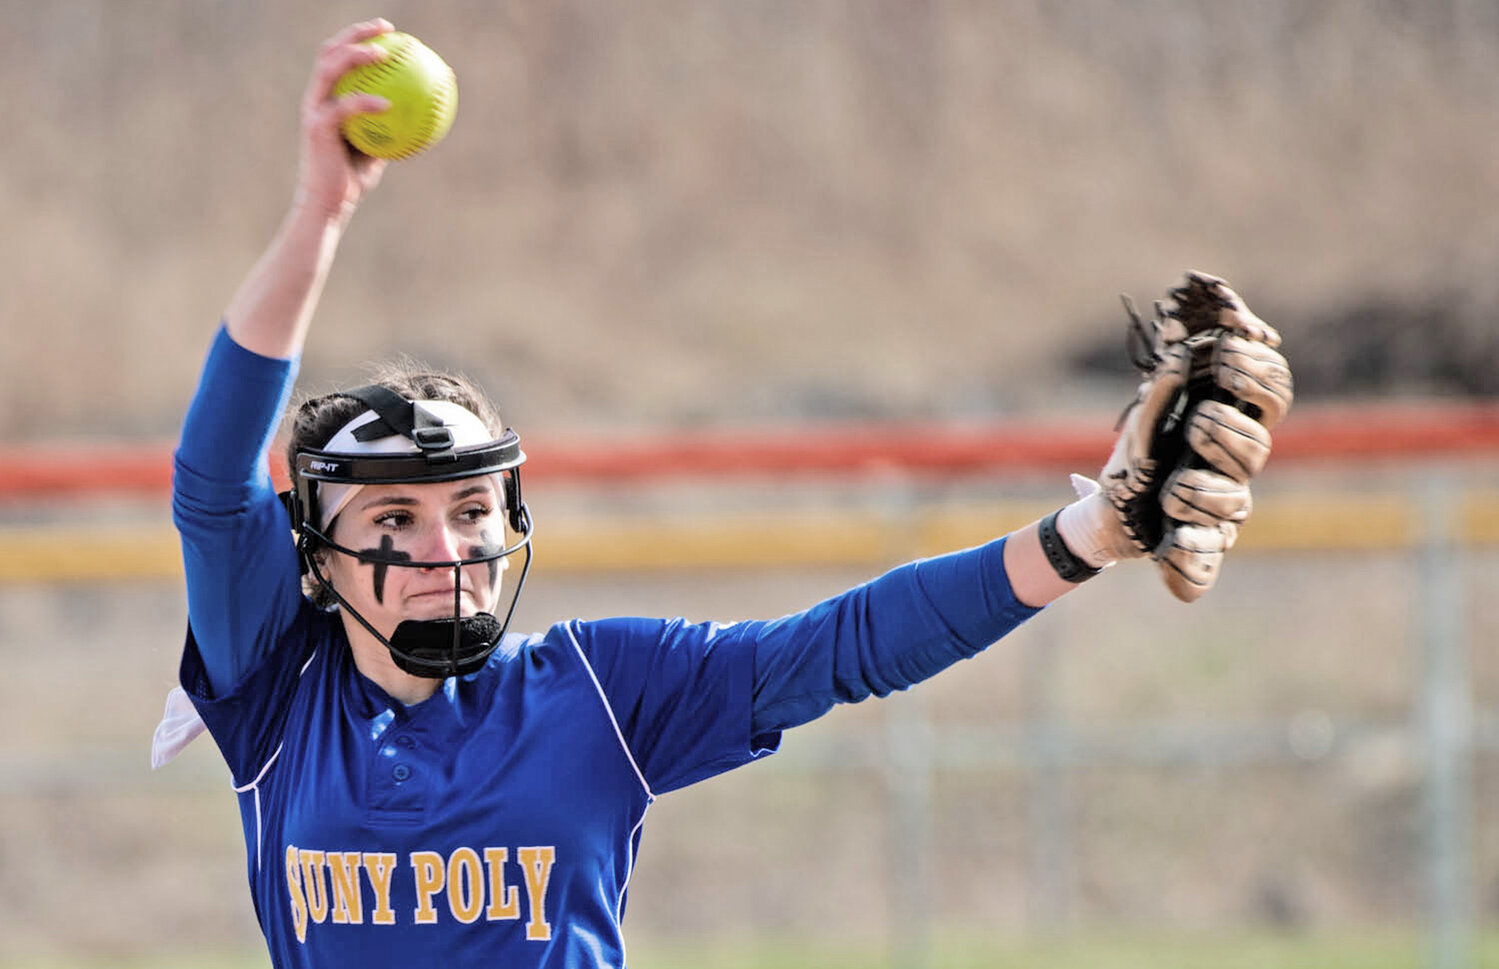 SUNY Polytechnic Institute softball pitcher Trinity Critelli (Frankfort/Frankfort-Schuyler) was named the North Atlantic Conference (NAC) co-Pitcher of the Week after the senior struck out 29 of the 36 batters she faced while tossing back-to-back no-hitters.